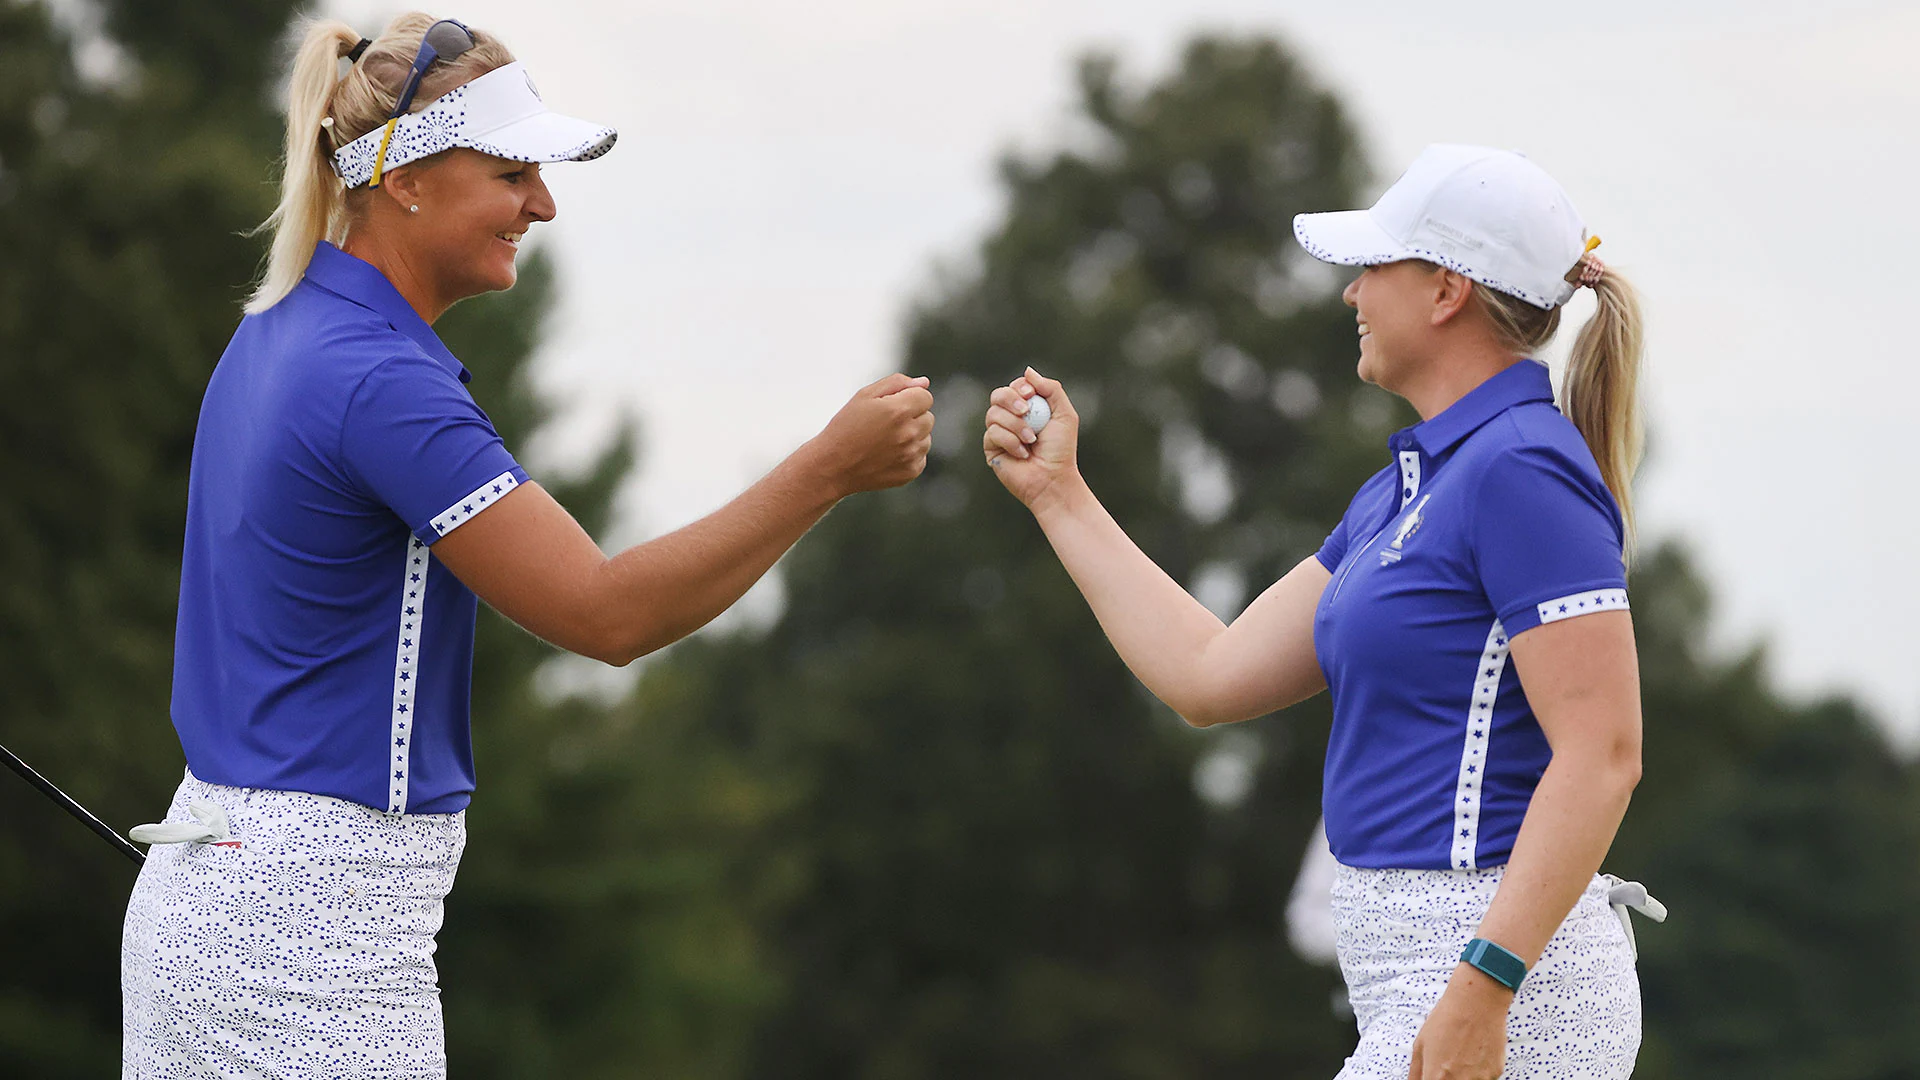 Afternoon fourball matches on Day 1 of the Solheim Cup